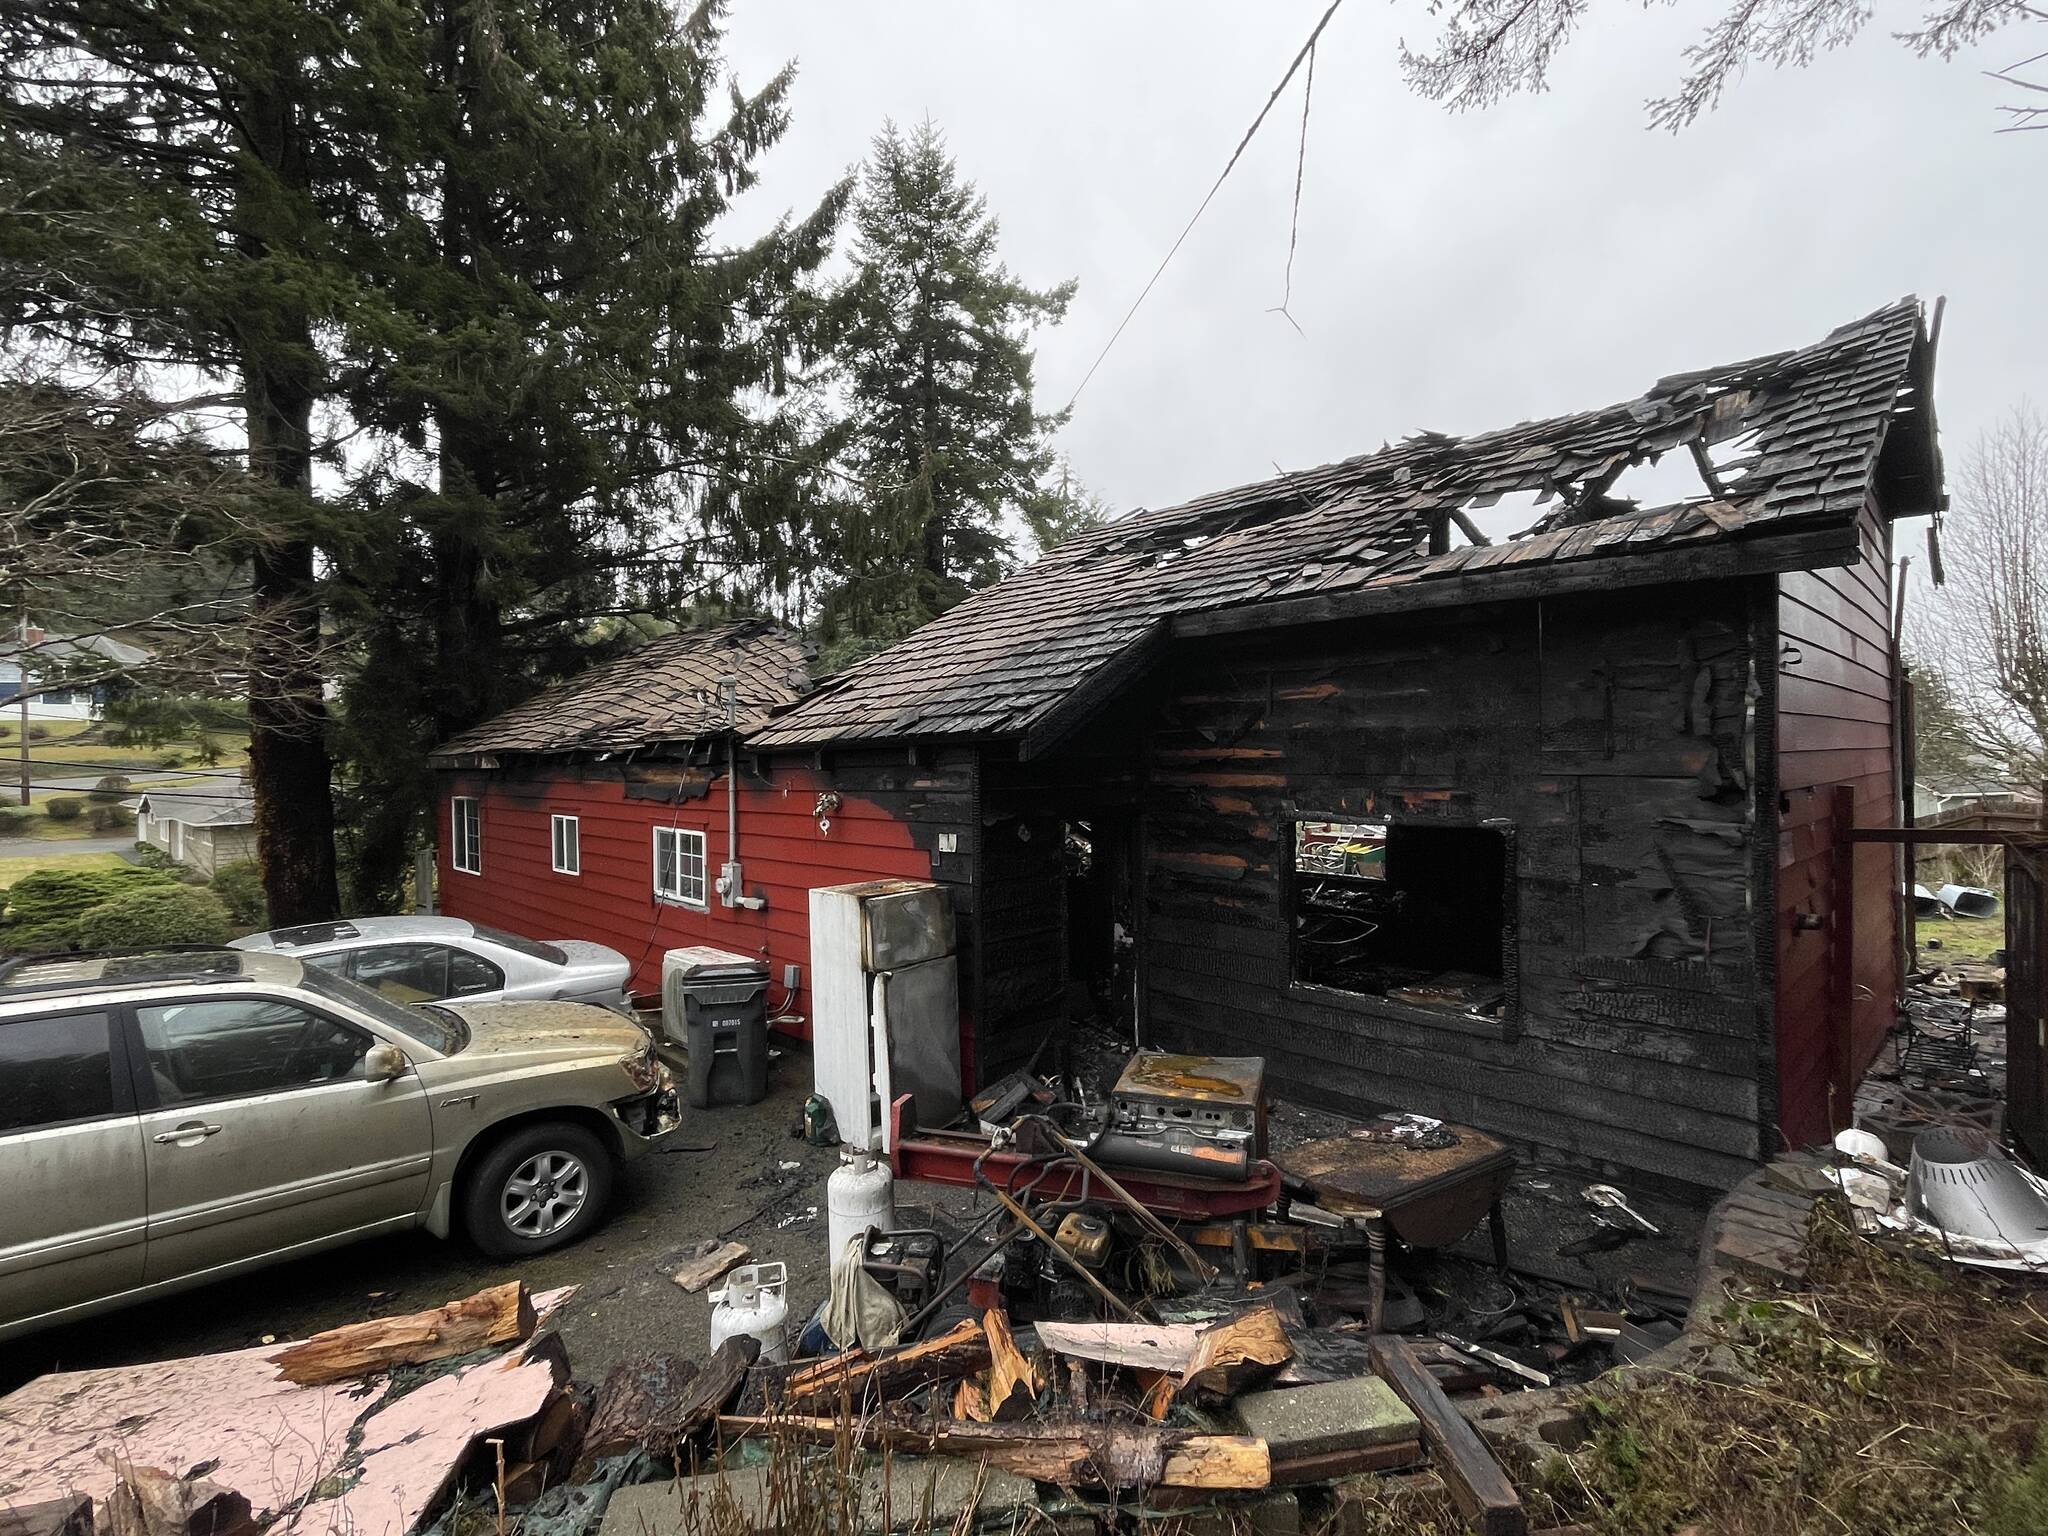 A fire that saw three different departments respond completely destroyed a Hoquiam residence over the holiday weekend. (Michael S. Lockett / The Daily World)